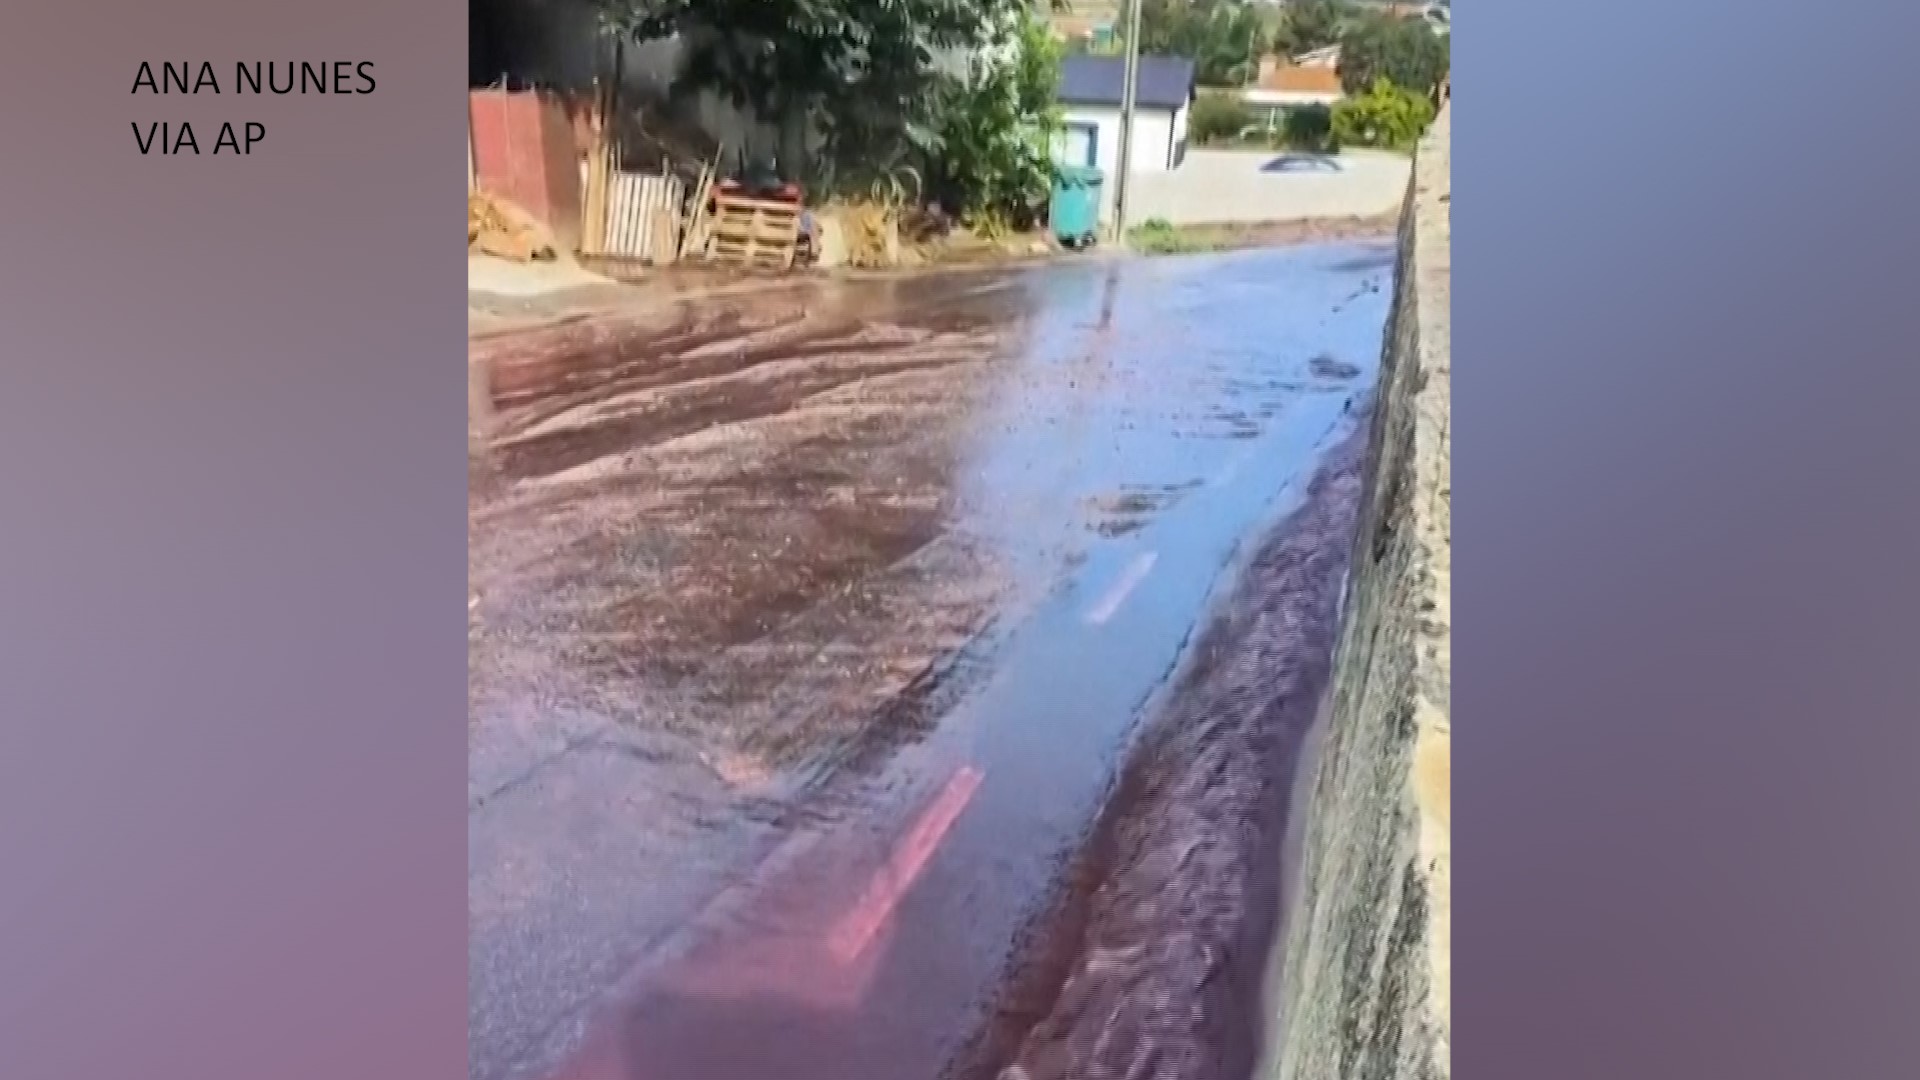 Footage emerged on Monday of a river of red wine running through the street of a Portuguese village.